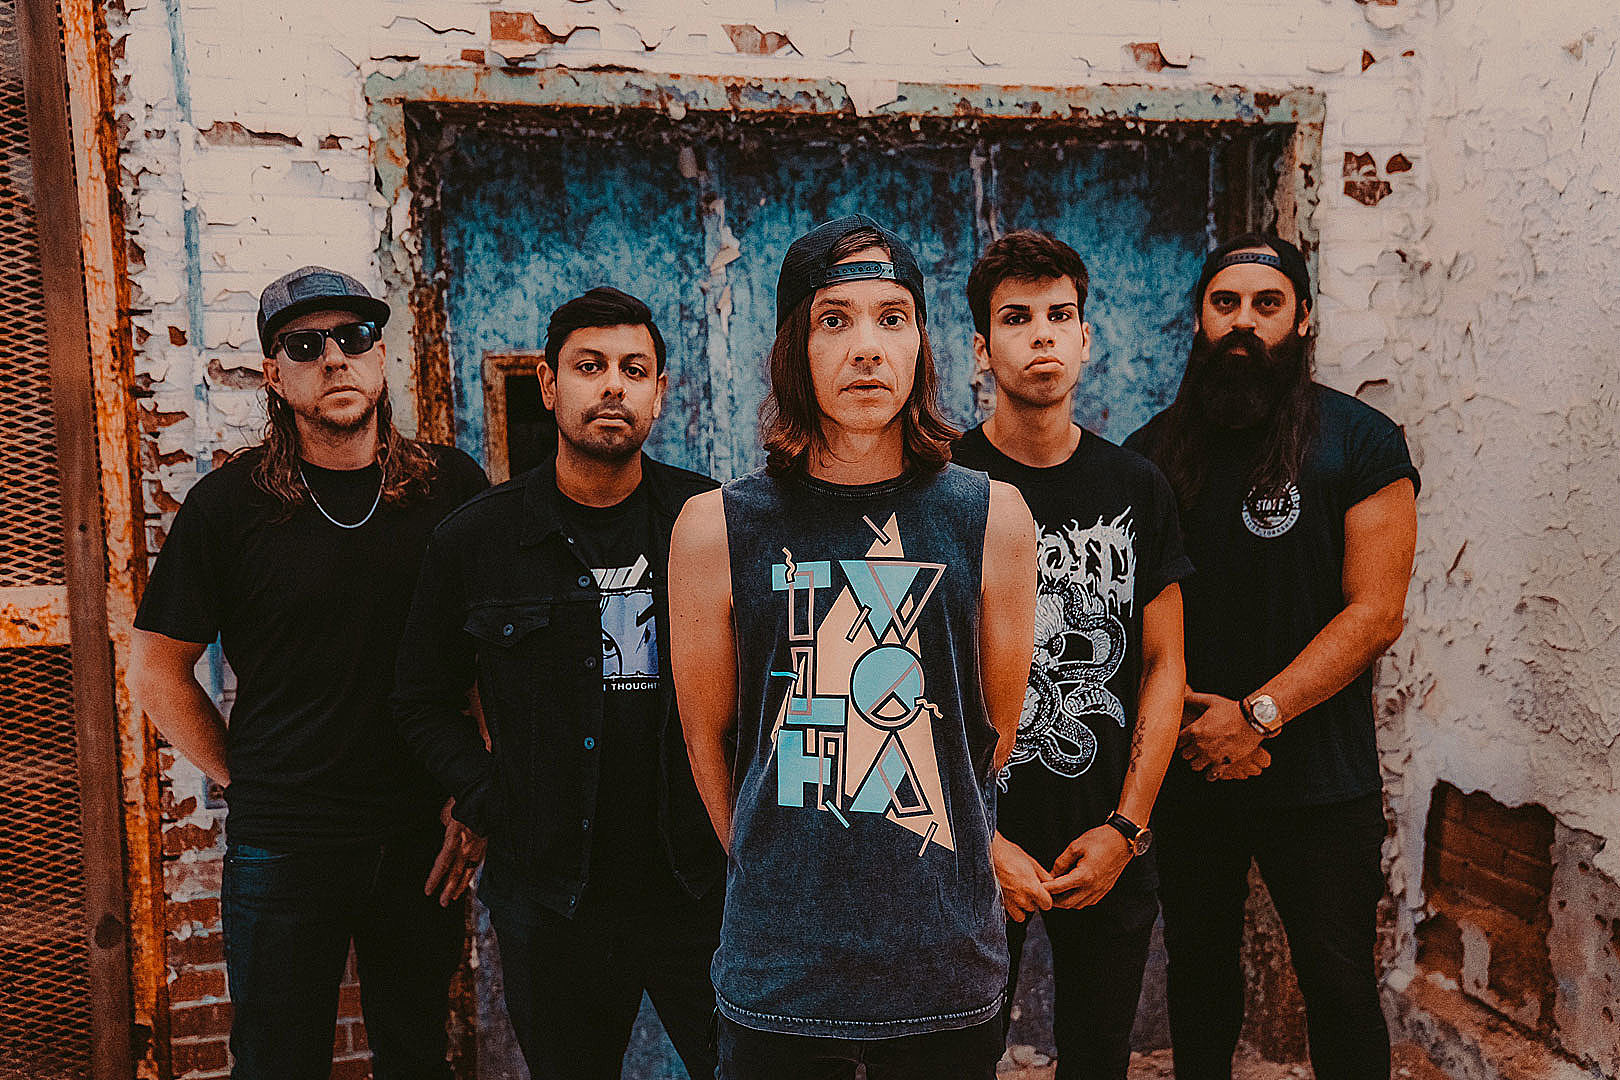 REVIEW: The Red Jumpsuit Apparatus Offer Hope And Acceptance on ‘The Emergency’ EP